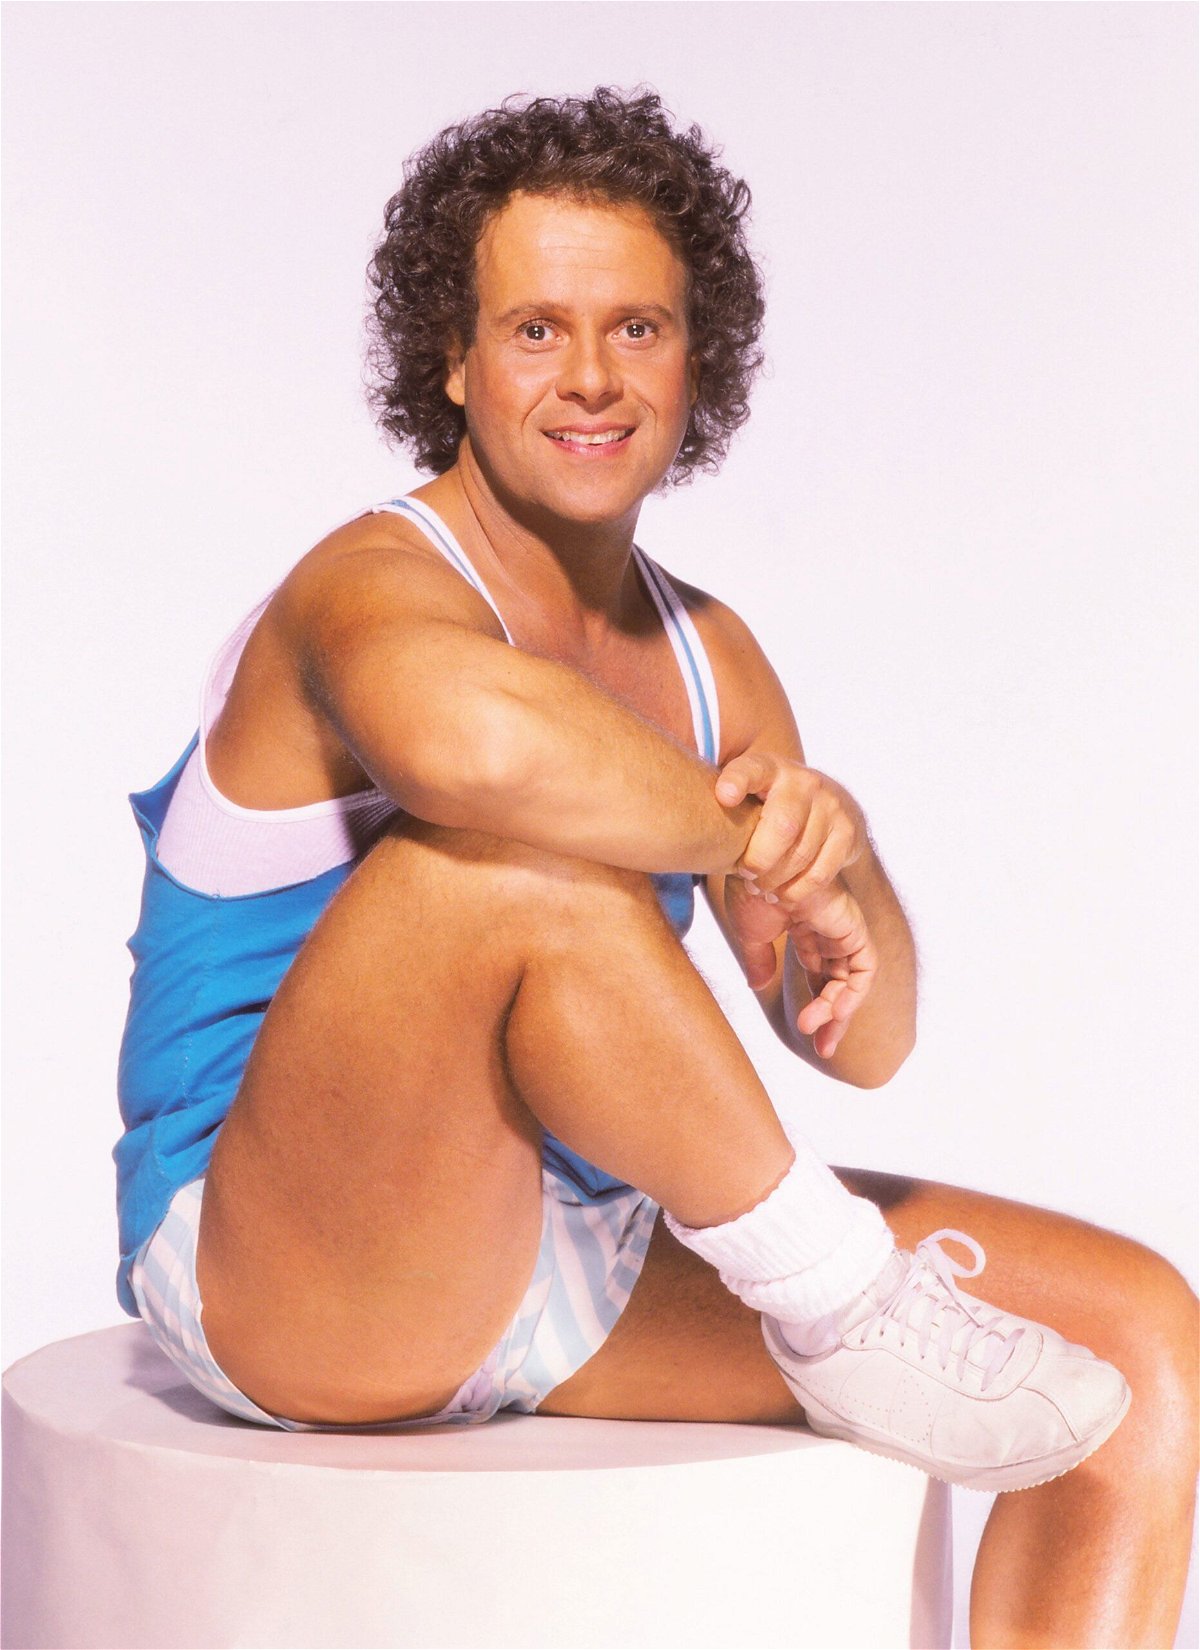 Richard Simmons seen here in 1992 in Los Angeles, California, has passed away aged 76